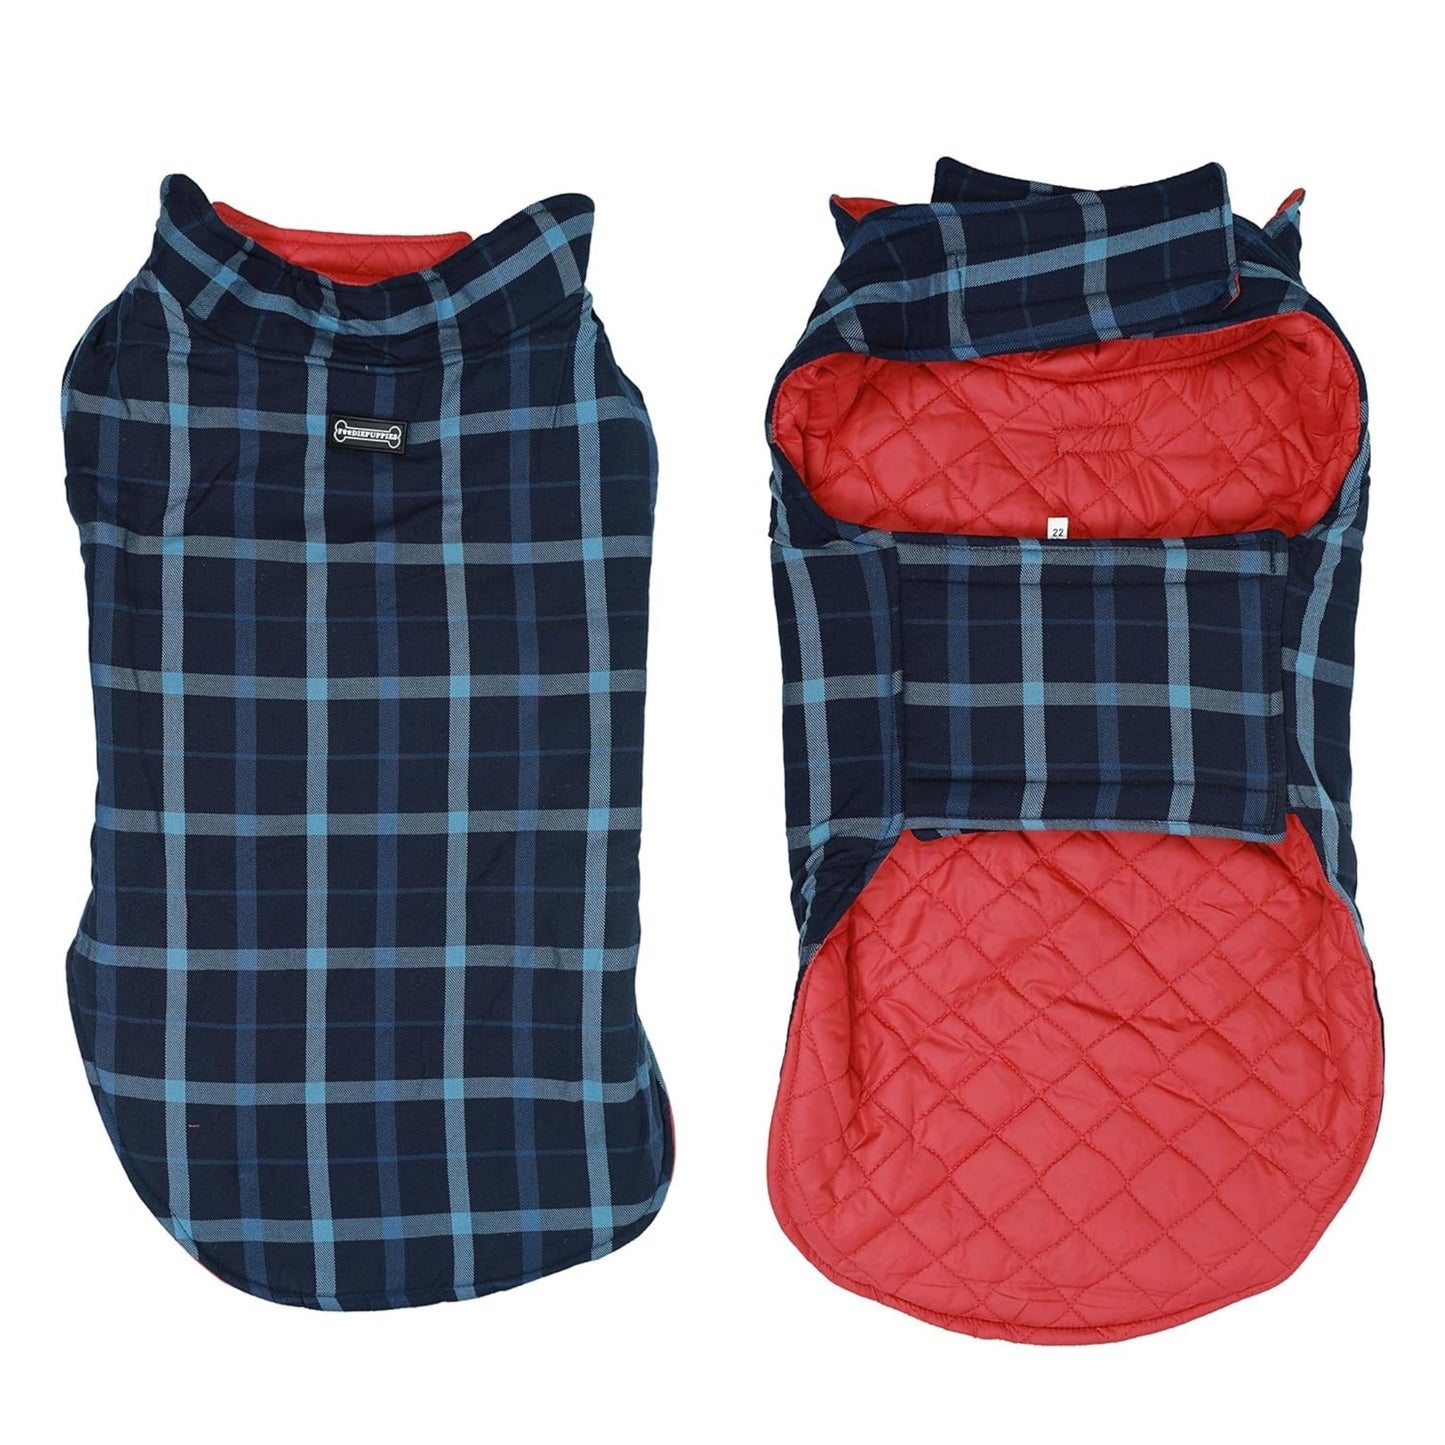 Foodie Puppies Winter Blue Check Jacket for Small Dogs & Puppies - 12inch